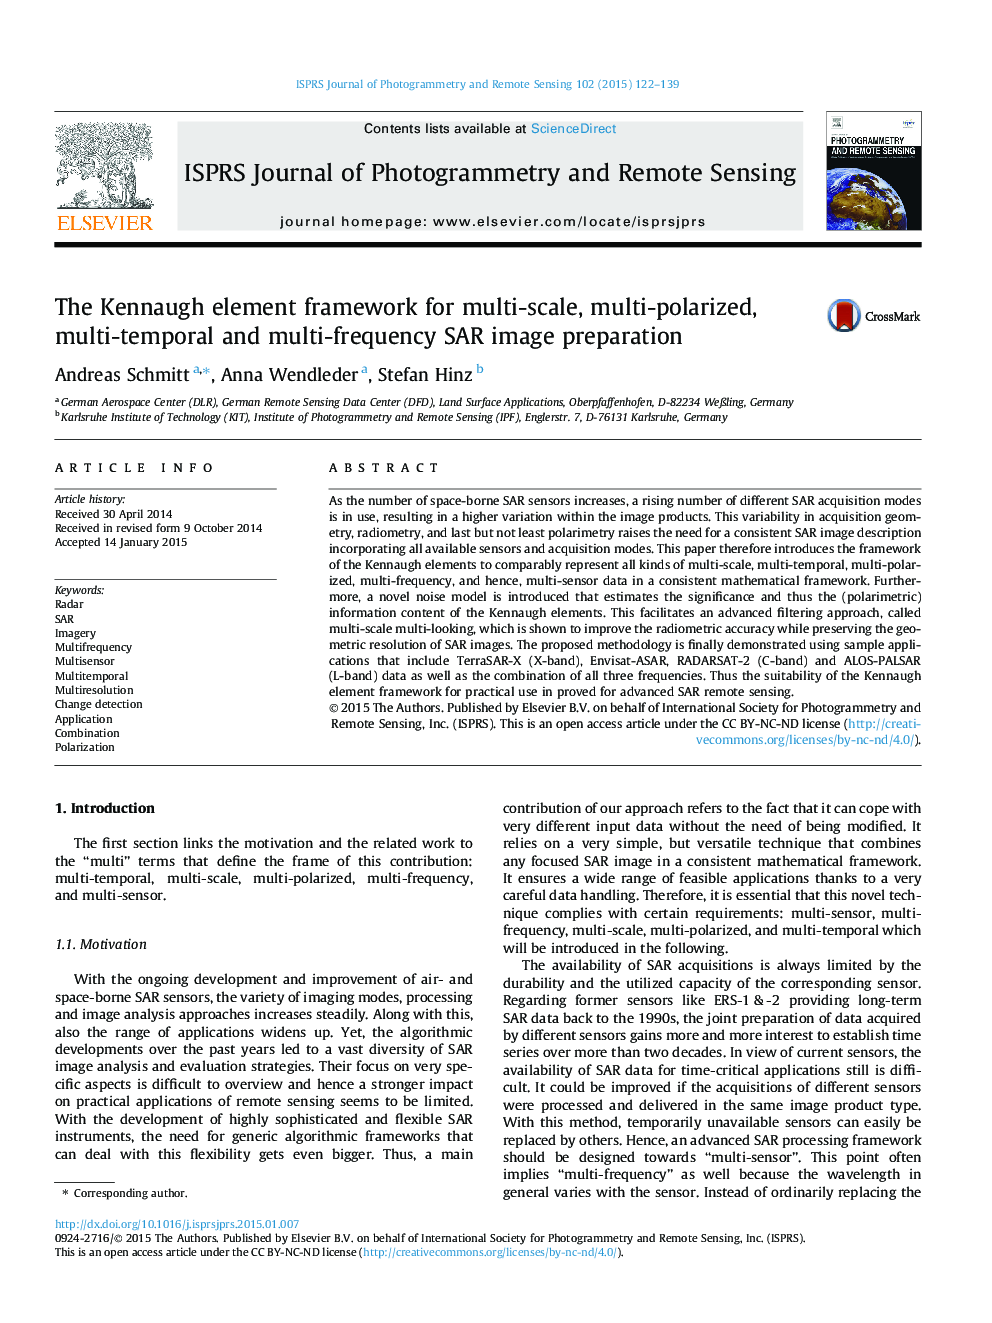 The Kennaugh element framework for multi-scale, multi-polarized, multi-temporal and multi-frequency SAR image preparation